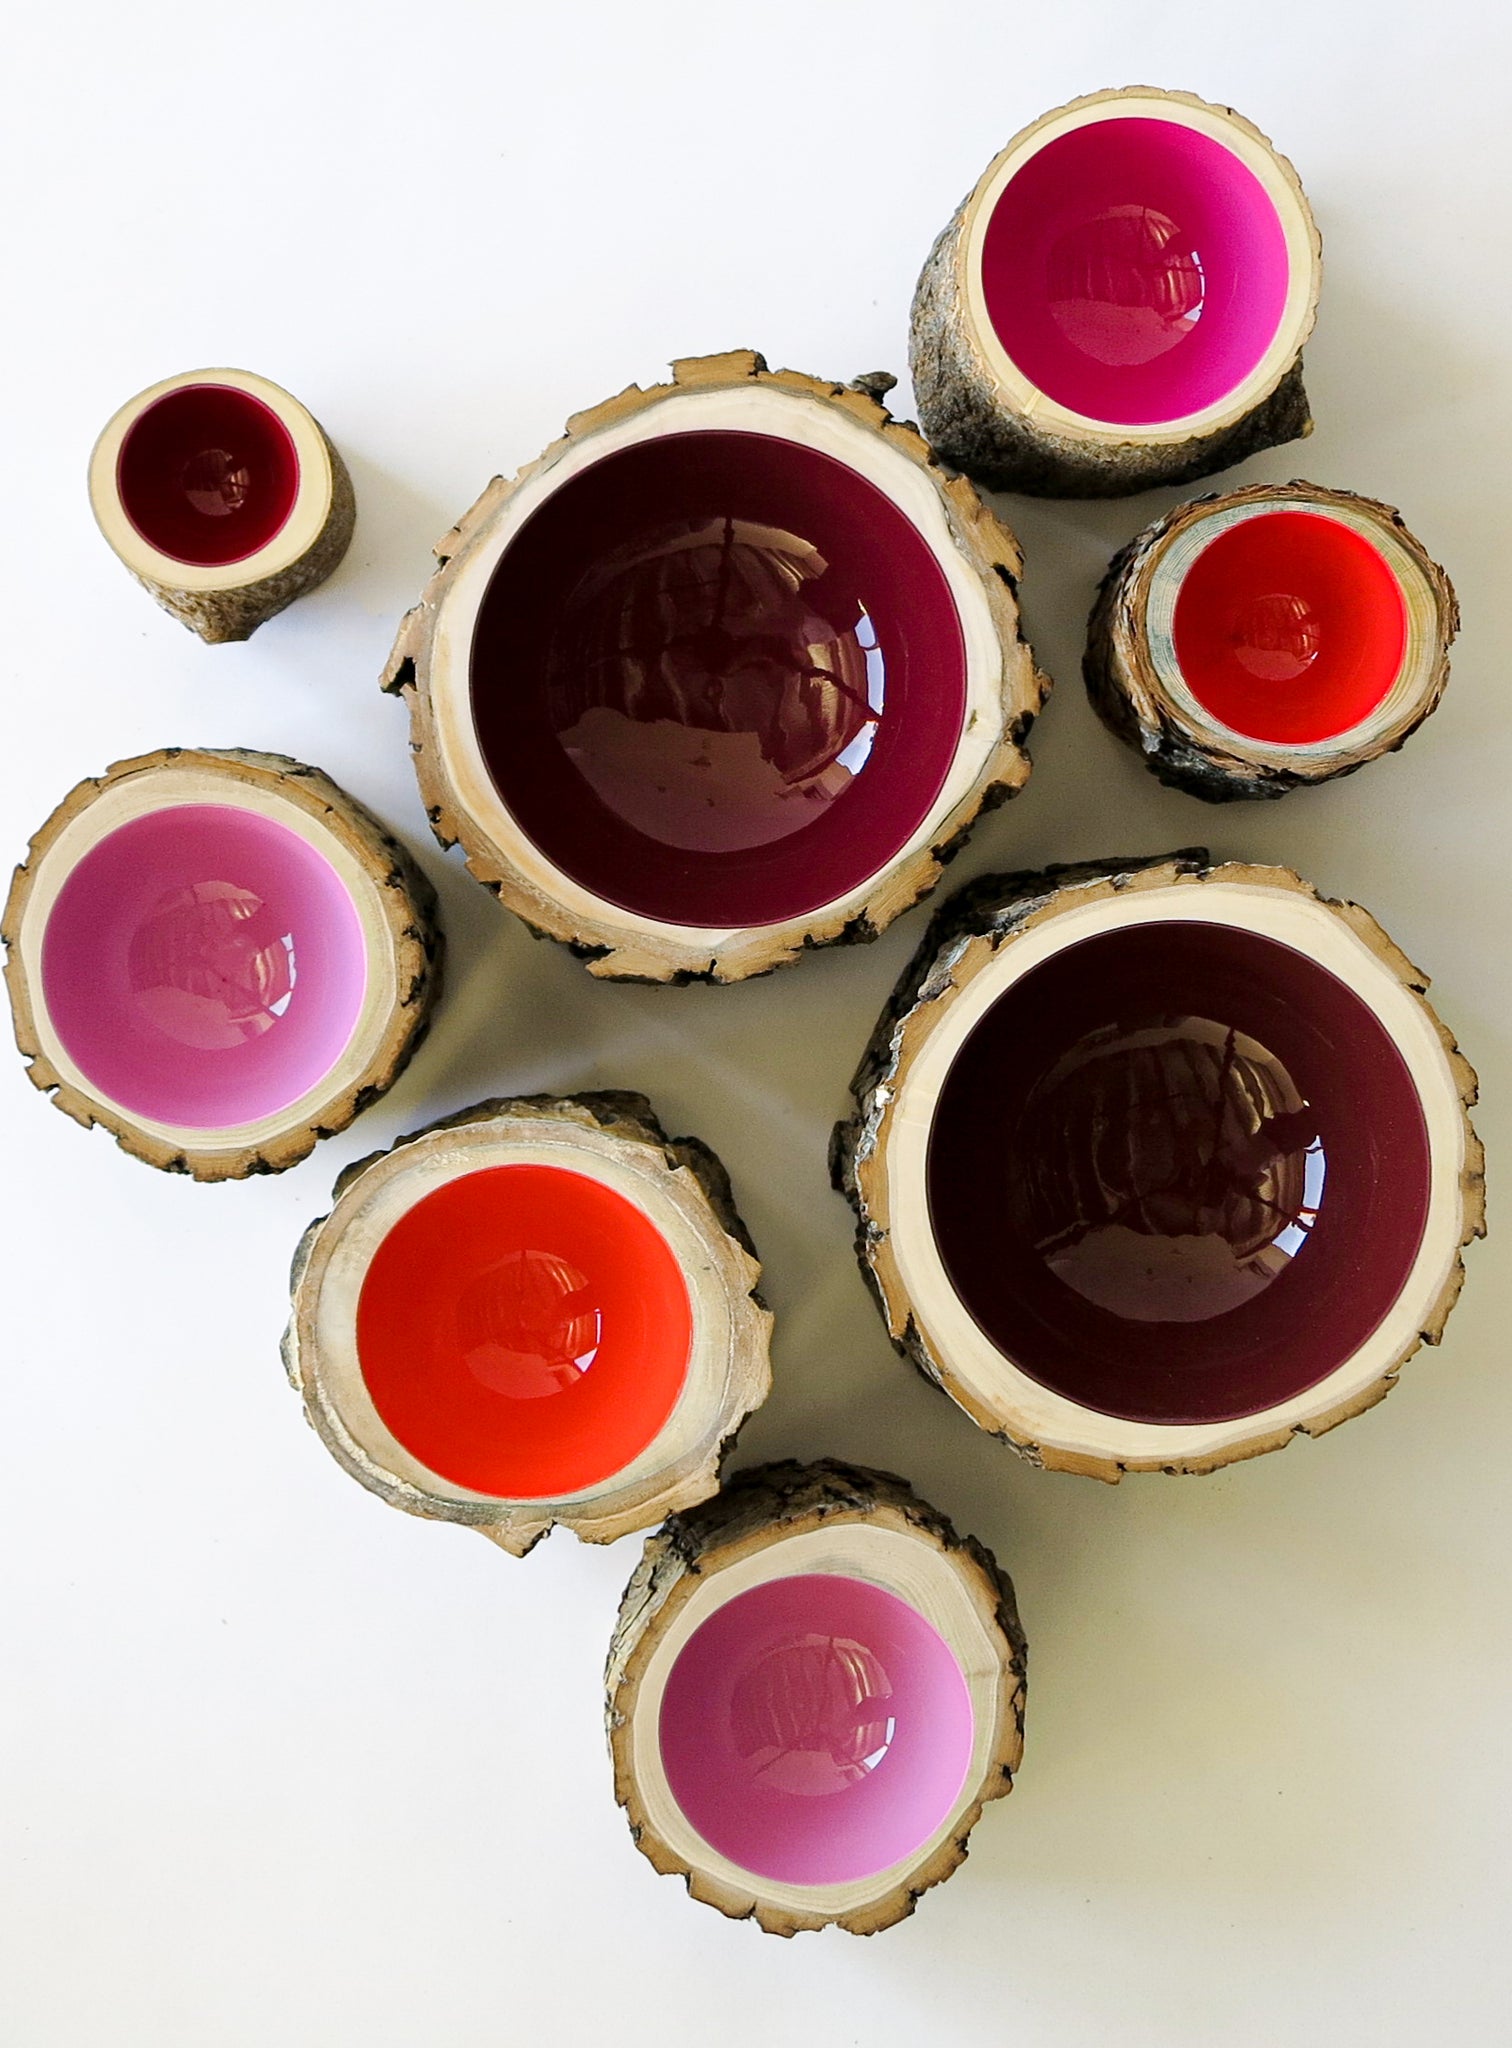 top view of a group of 8 Log Bowls in varying sizes and colours- 3 small wooden bowls with various barks, glossy interiors are bright red, dark current red, magenta and bright pink in colour.